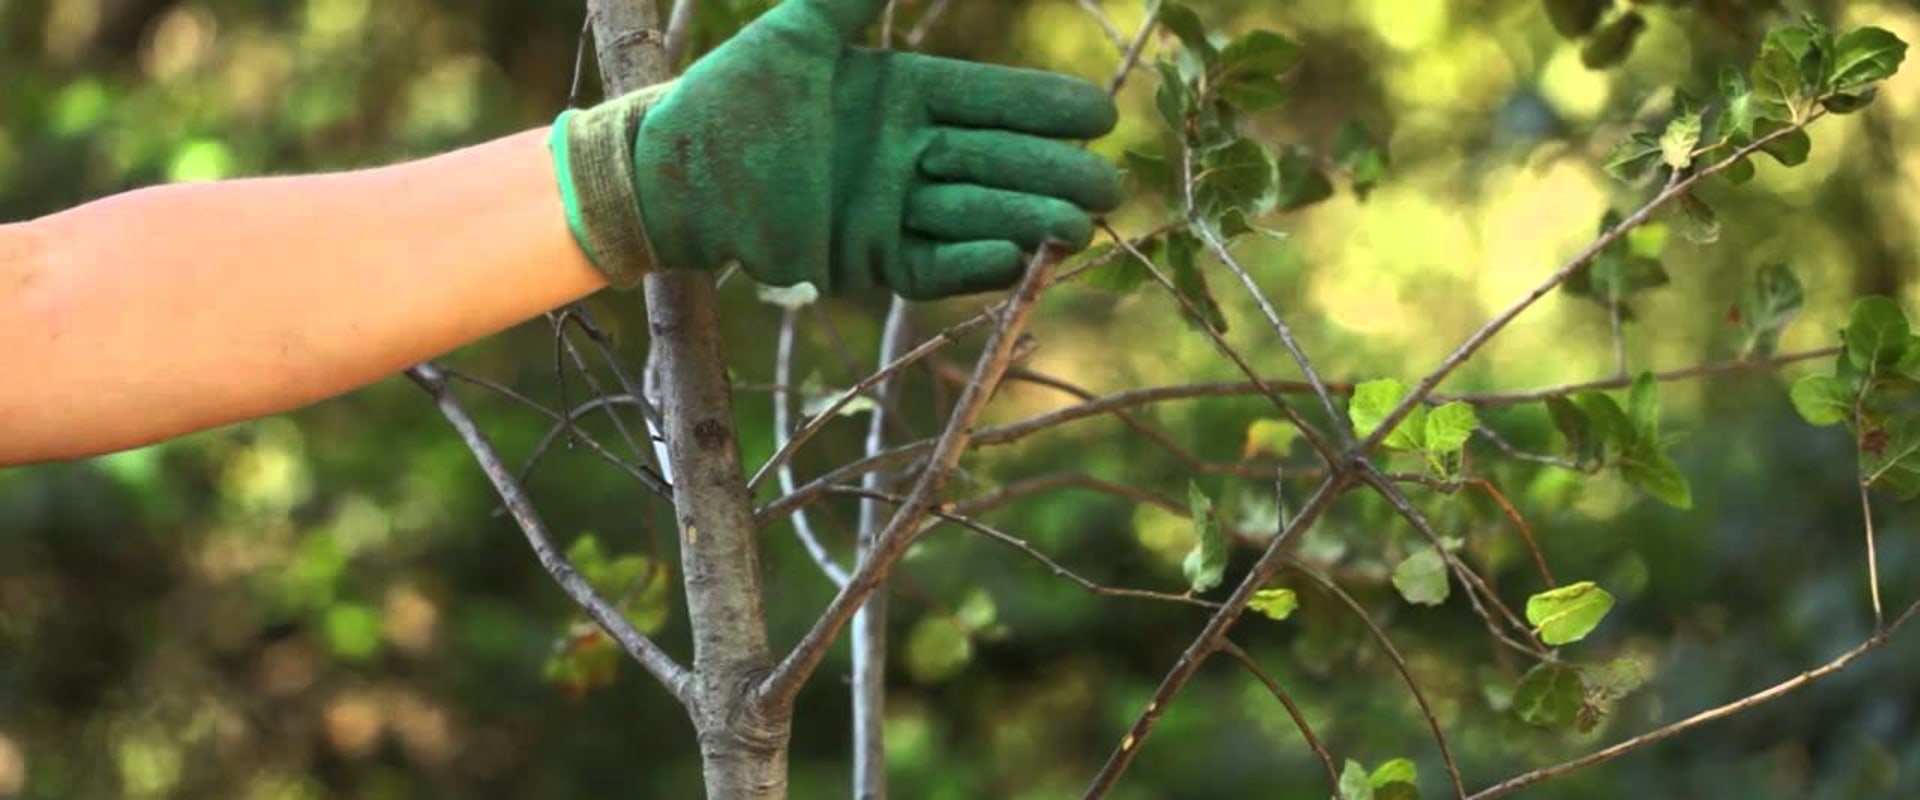 Removing Dead or Diseased Branches: A Tree Pruning Process